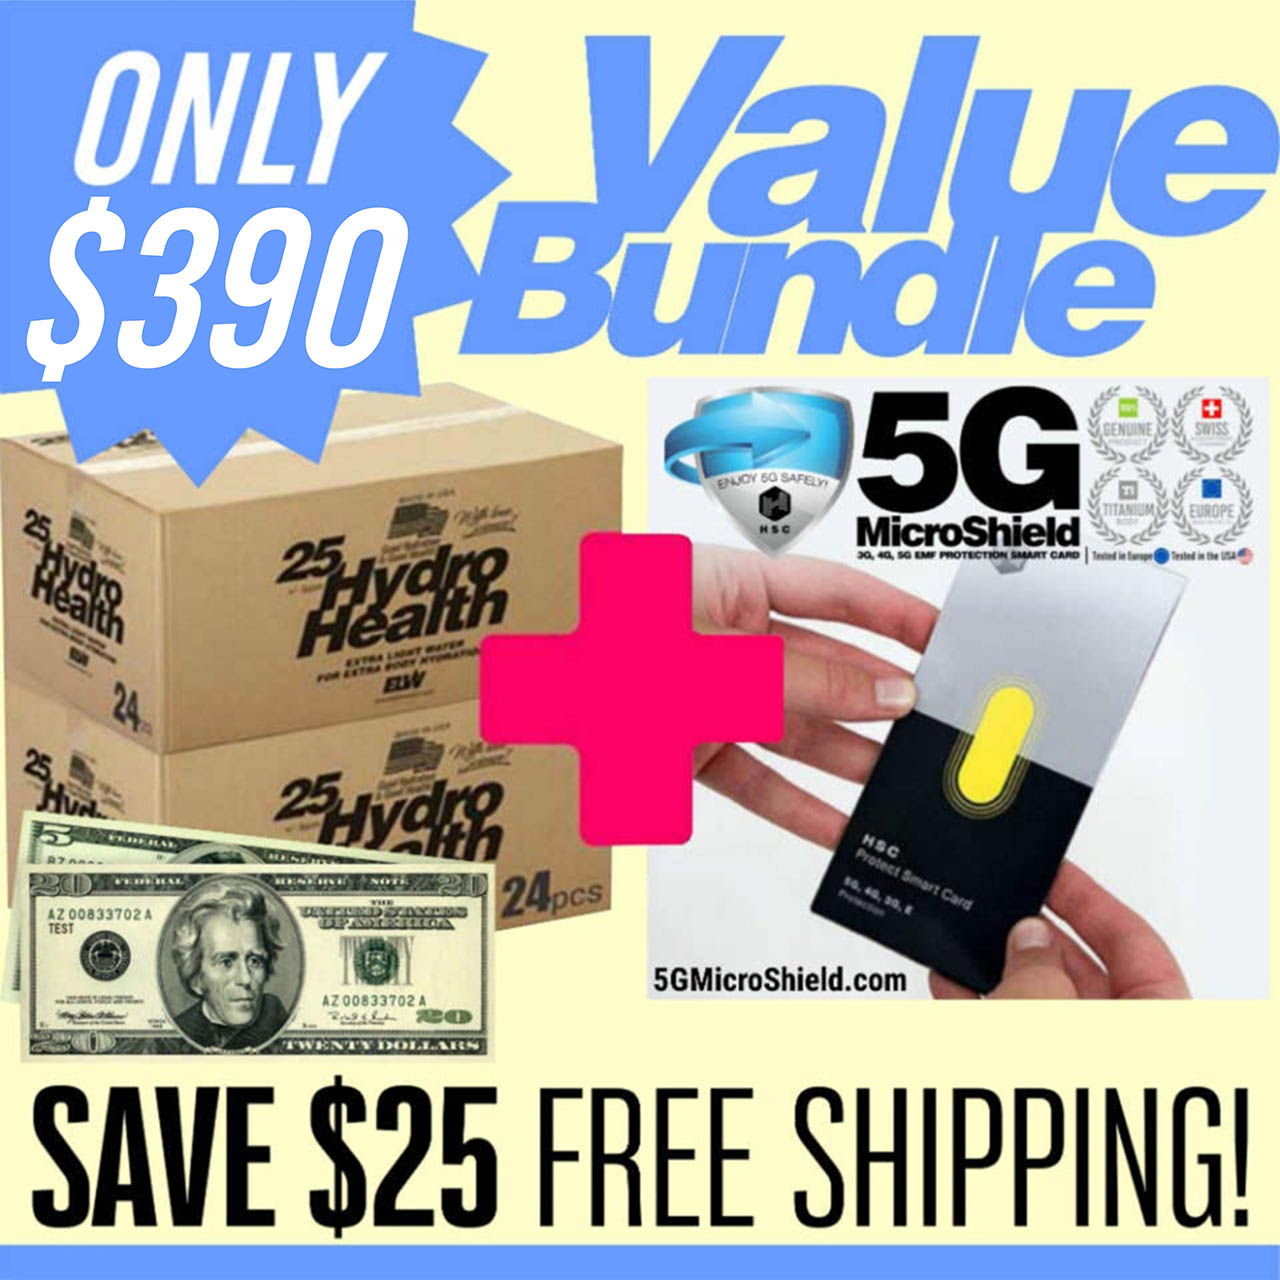 25 ppm DDW bundle (2 cases-48 bottles-500 ML each ) +one 3G,4G,5G  protection card for $395, you save $27-free delivery